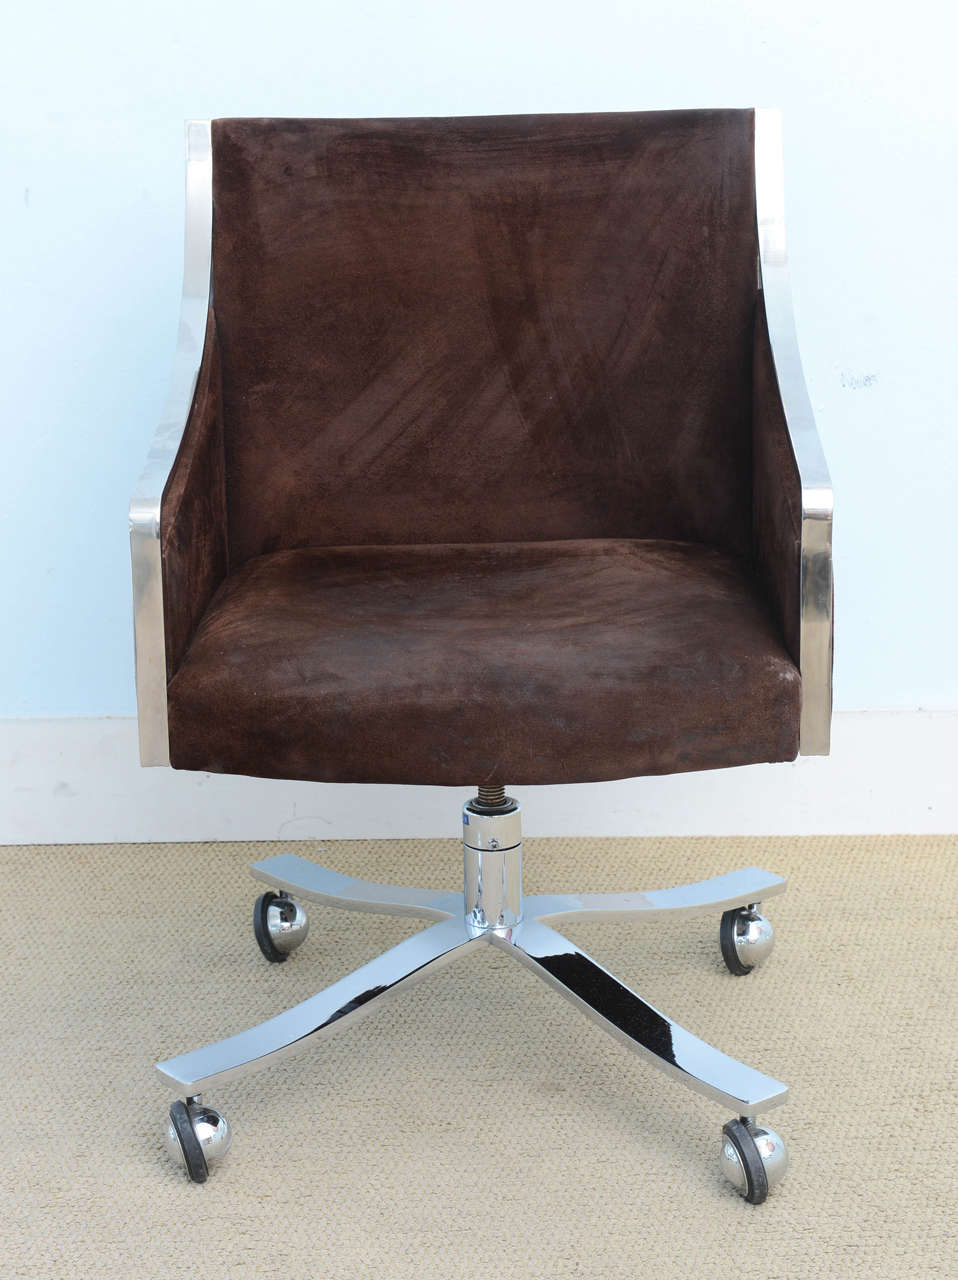 Sleek pair of Polished Stainless Steel  Stow  & Davis Office , desk chairs . These are quite comfortable and still retain the original Brown Real Suede Upholstery ,  these where professionally clean ,however you might want to reupholster them with